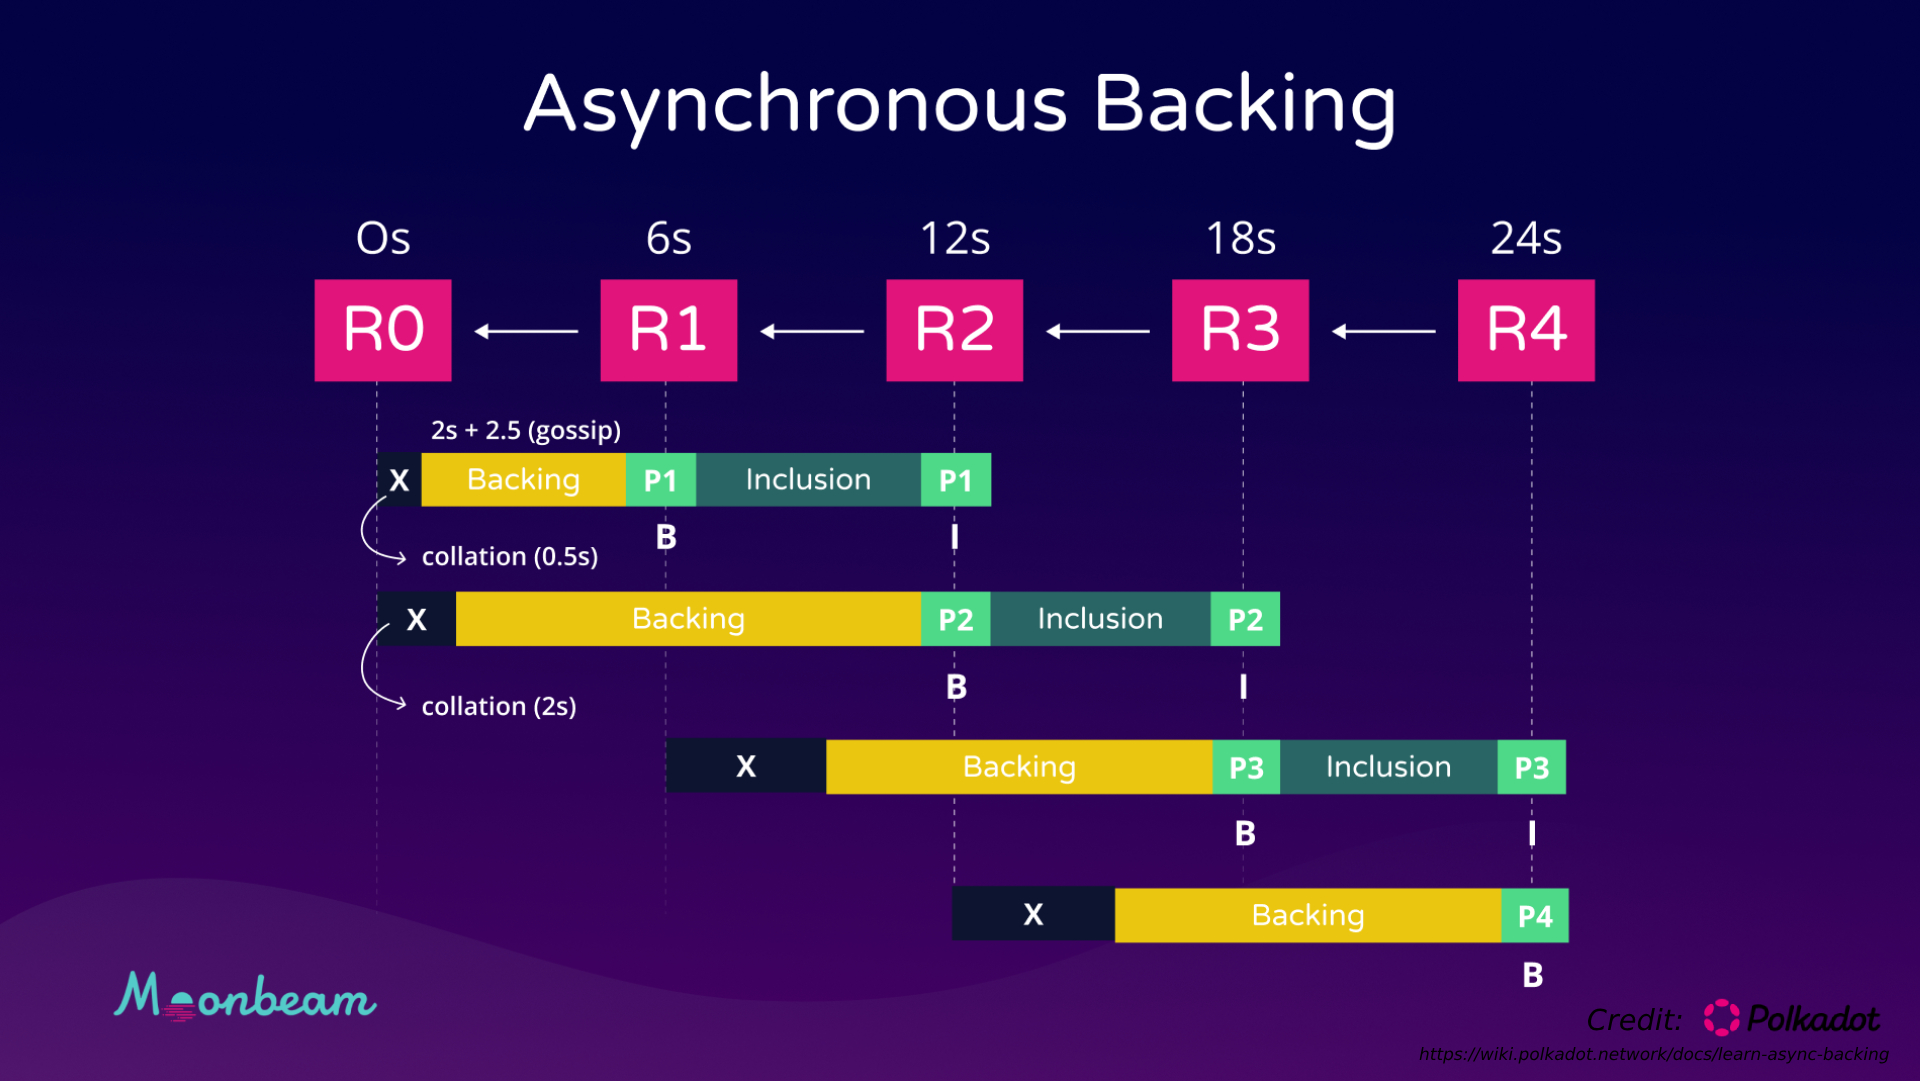 Diagram showing Moonbeam's upgrade to asynchronous backing for faster block times, including phases R0 to R4 and improvements in block production intervals